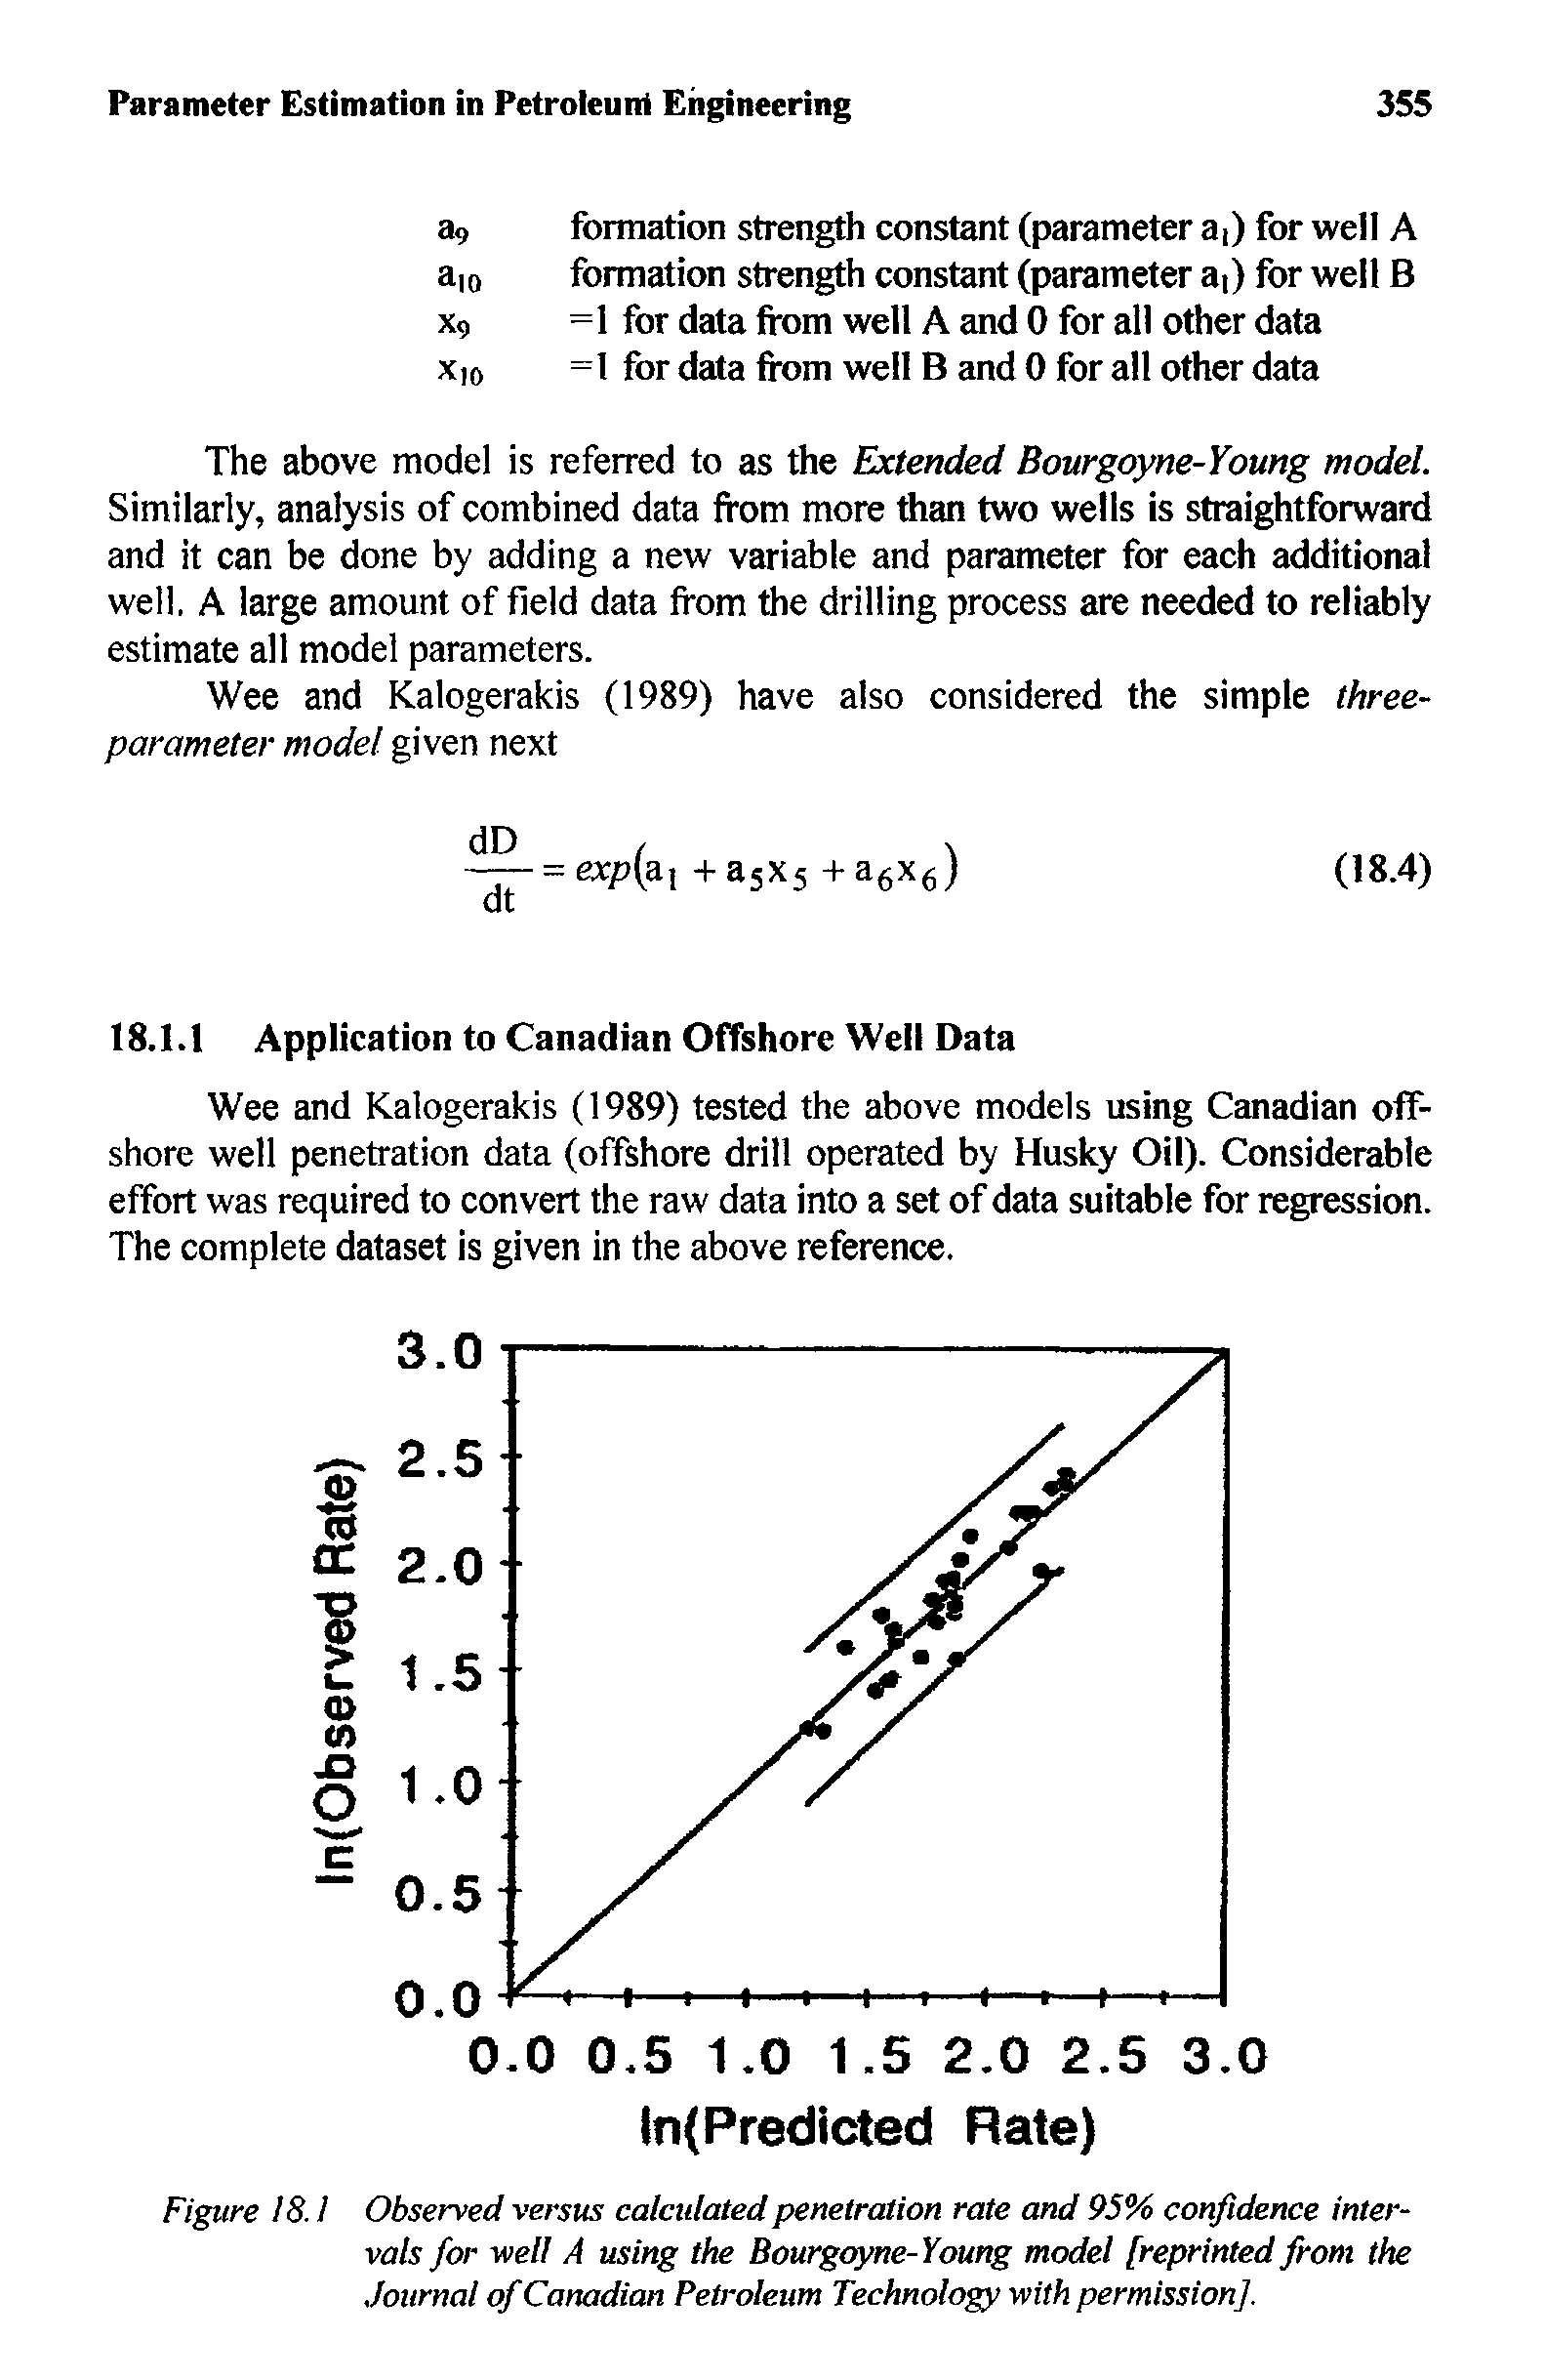 Figure 18.1 Observed versus calculated penetration rate and 95% confidence intervals for well A using the Bourgoyne-Young model [reprinted from the Journal of Canadian Petroleum Technology with permission].